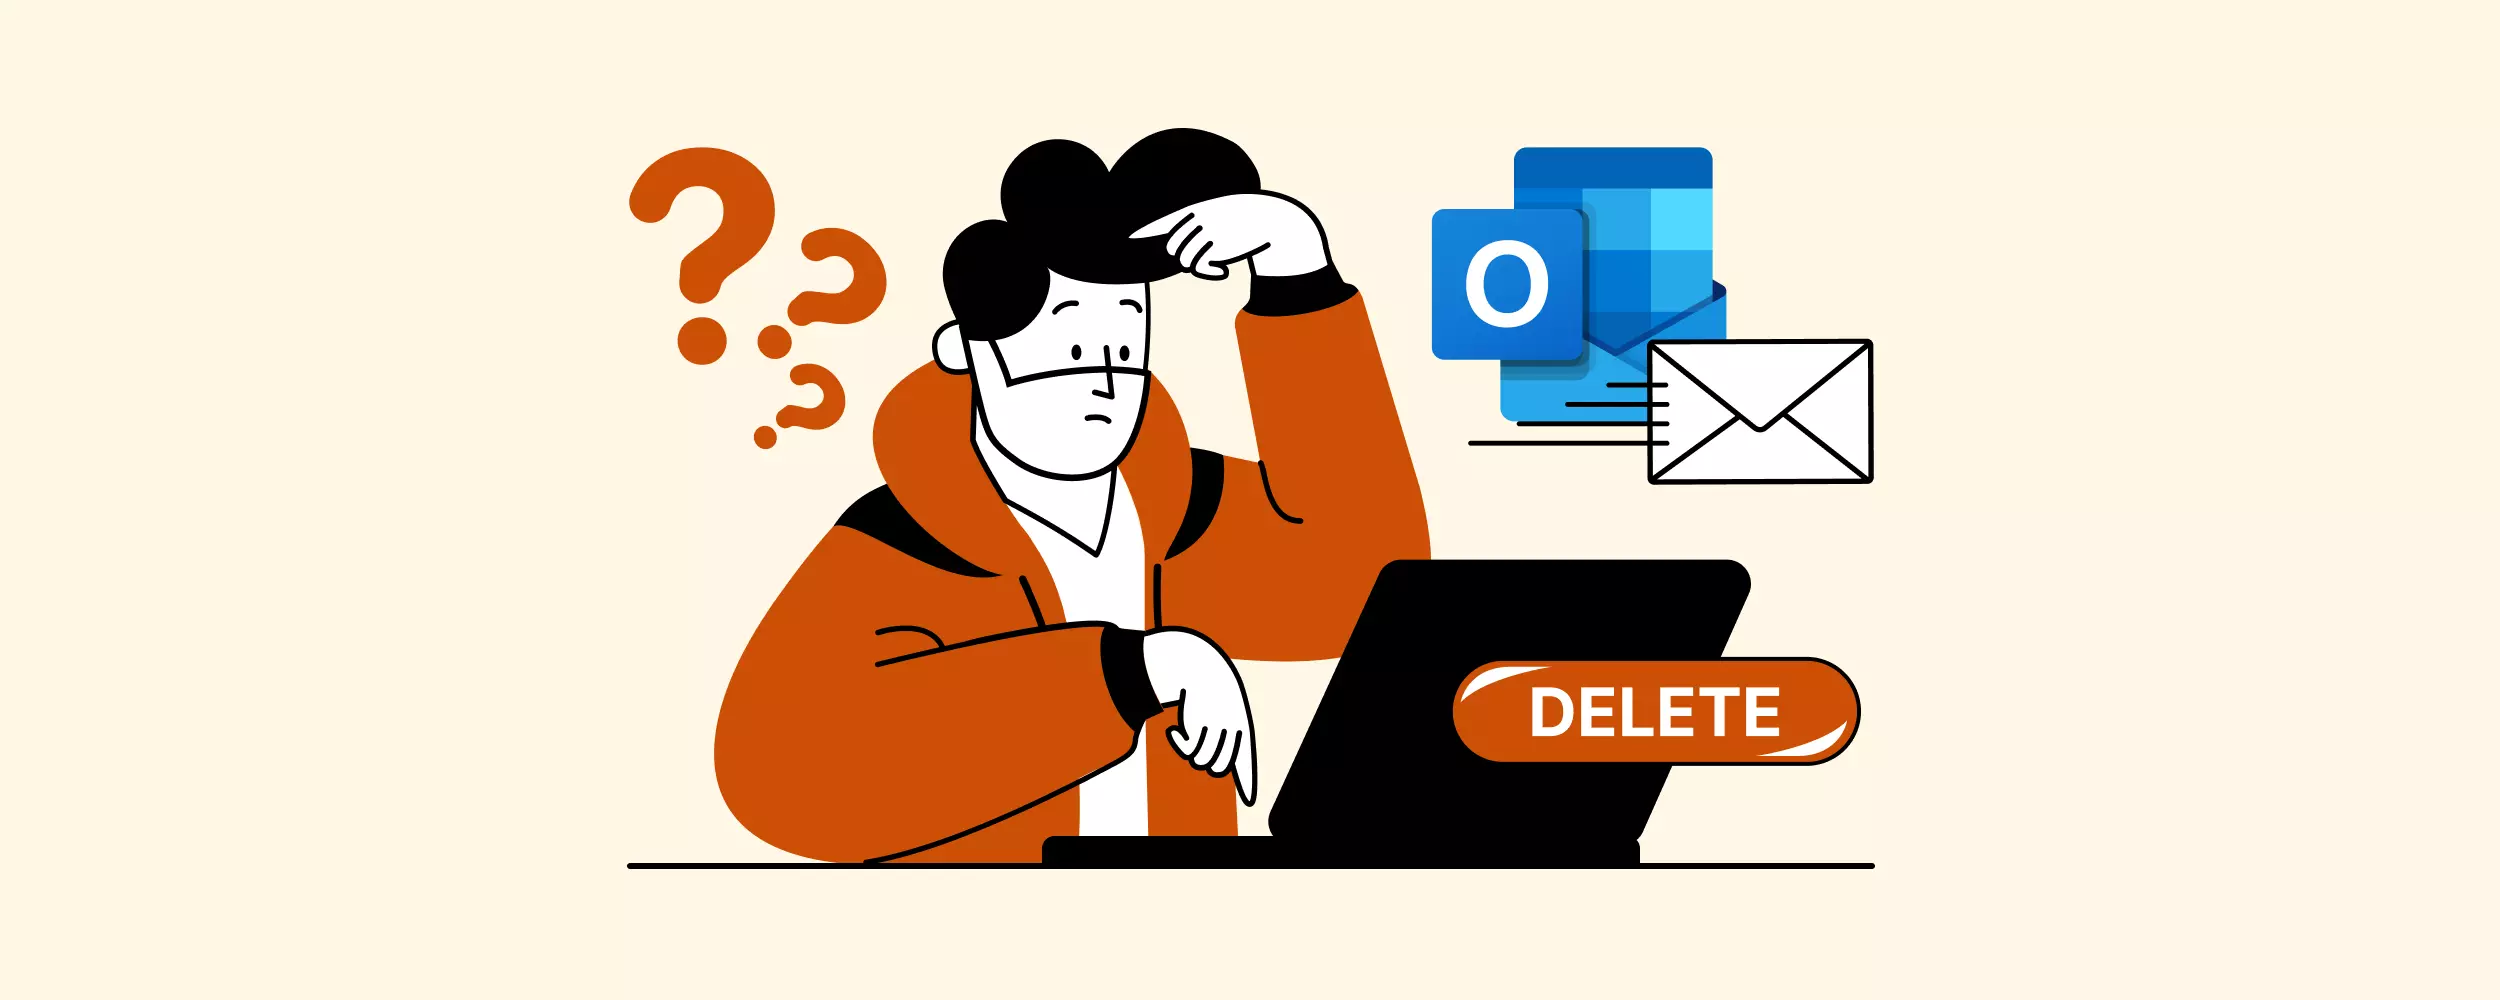 Recalling Emails in Outlook: Full Guide